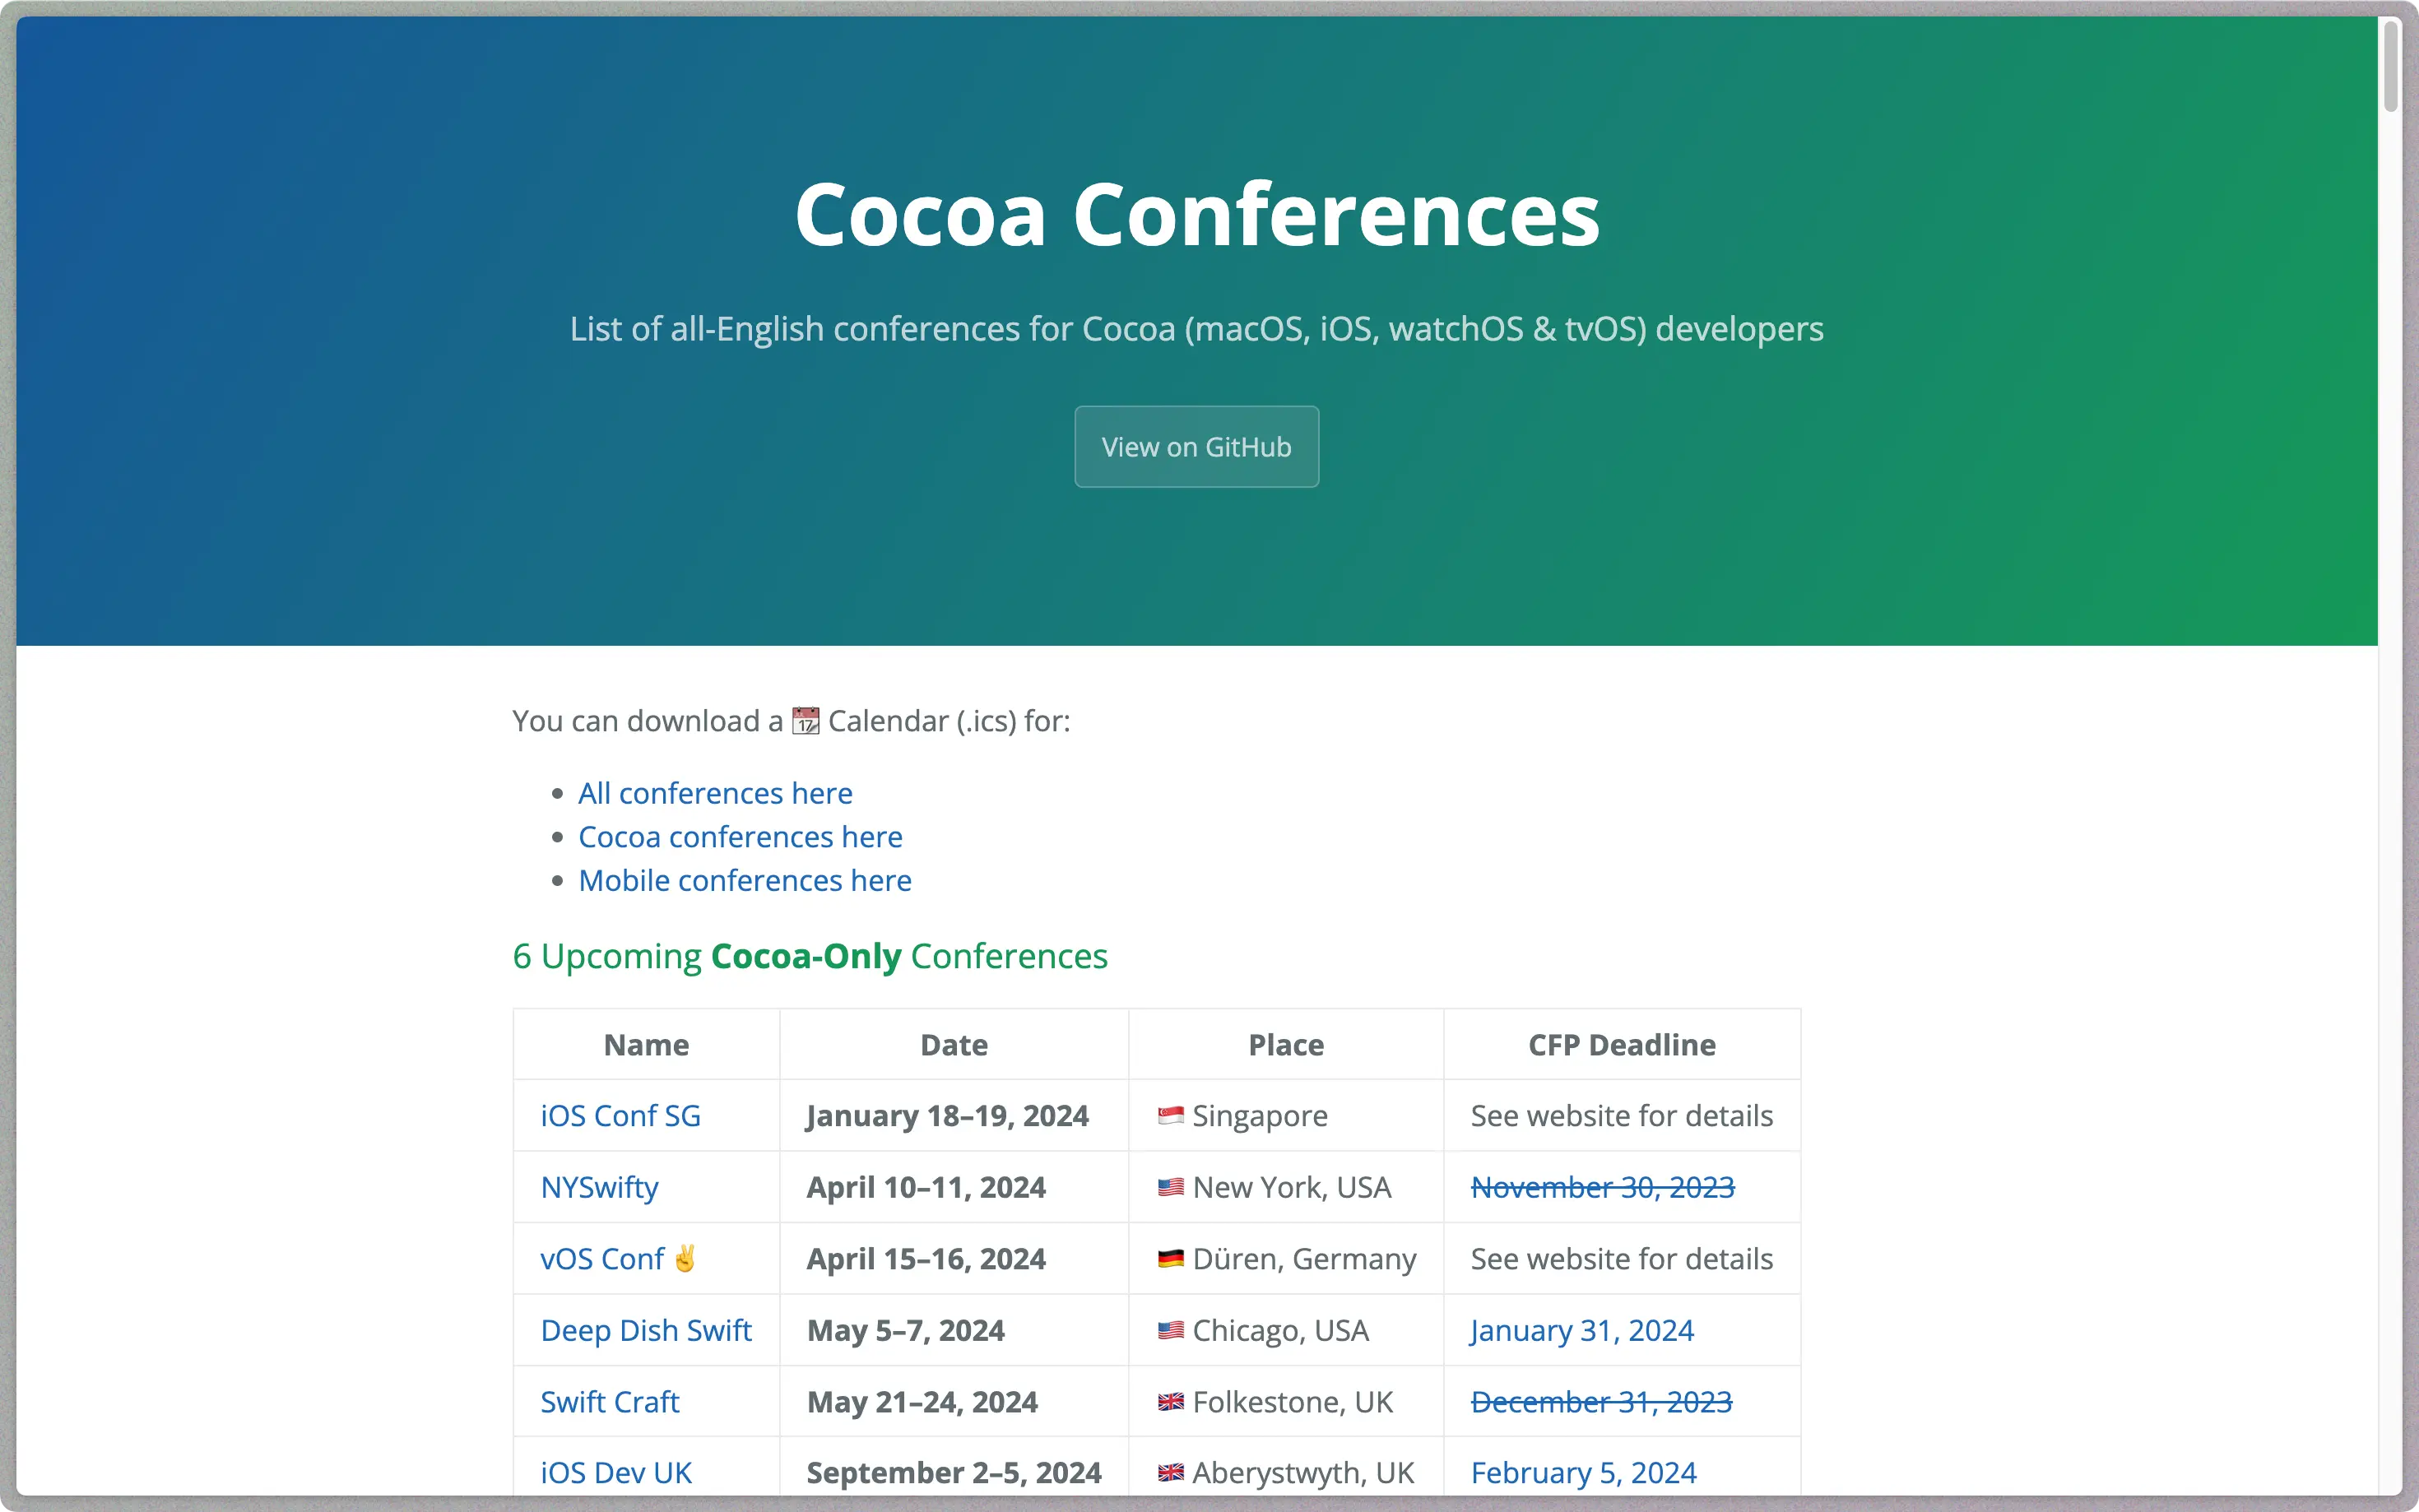 A screenshot of the cocoaconferences website showing a list of upcoming conferences.